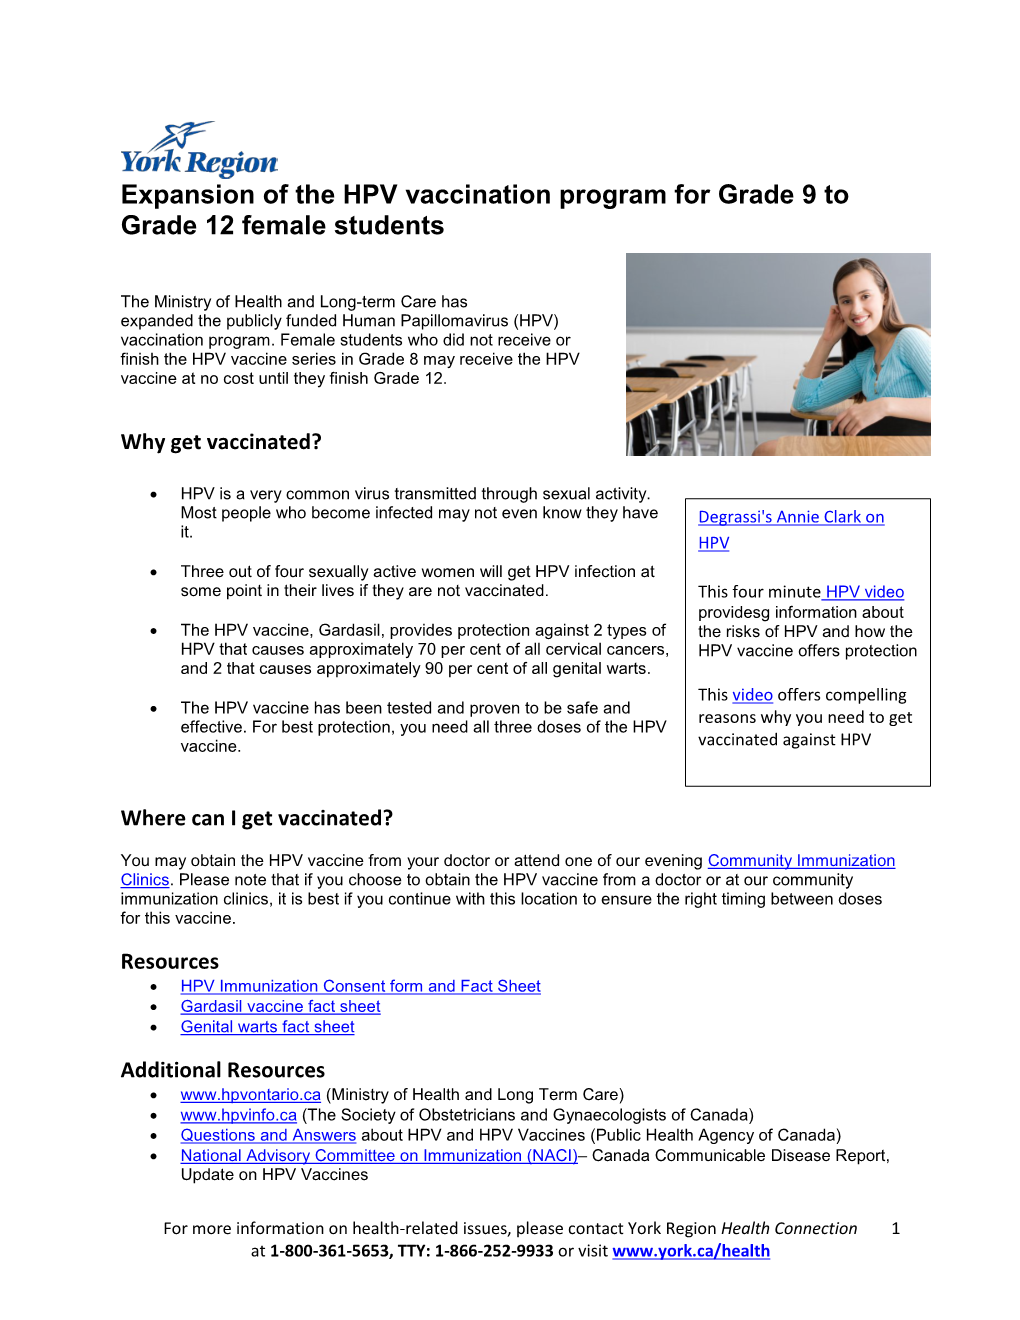 Expansion of the HPV Vaccination Program for Female Students